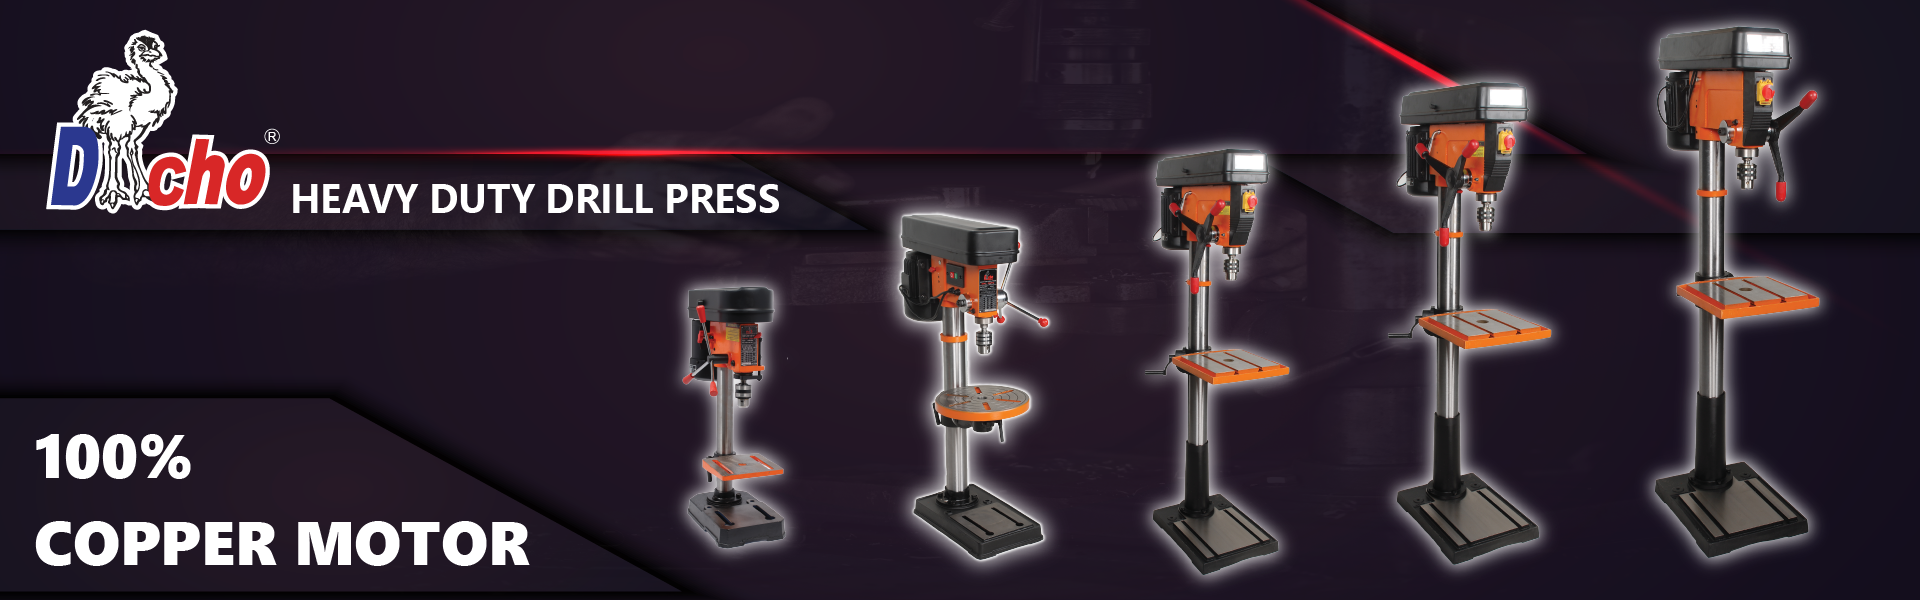 Elevate Your Craftsmanship with the Dacho Drill Press